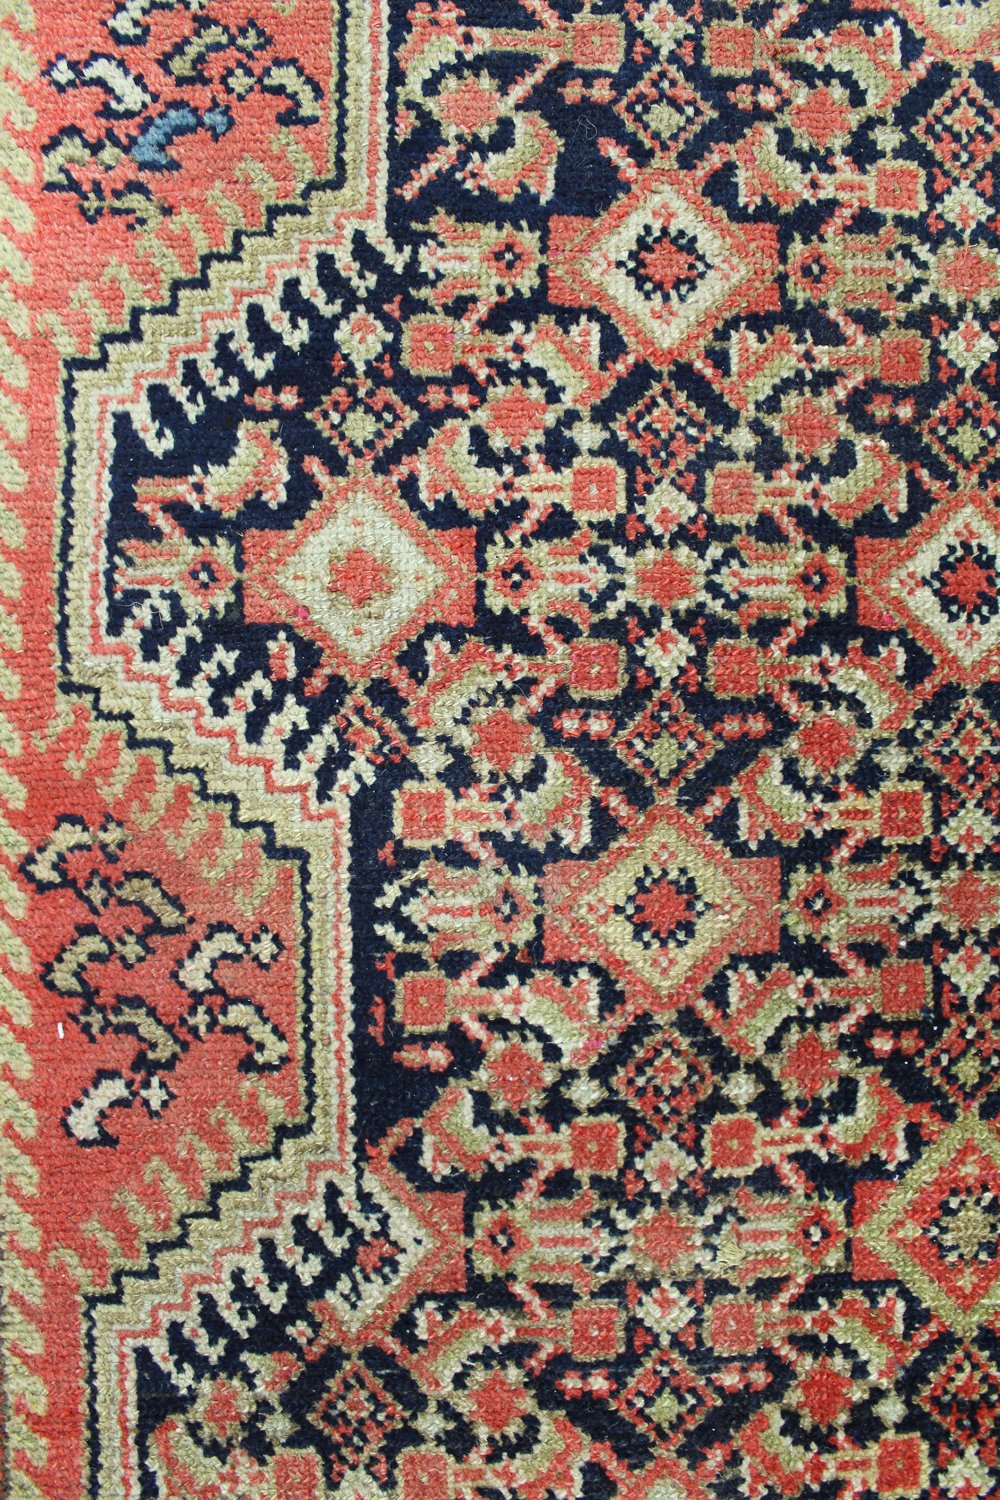 Antique Malayer Handwoven Tribal Rug, JF8067